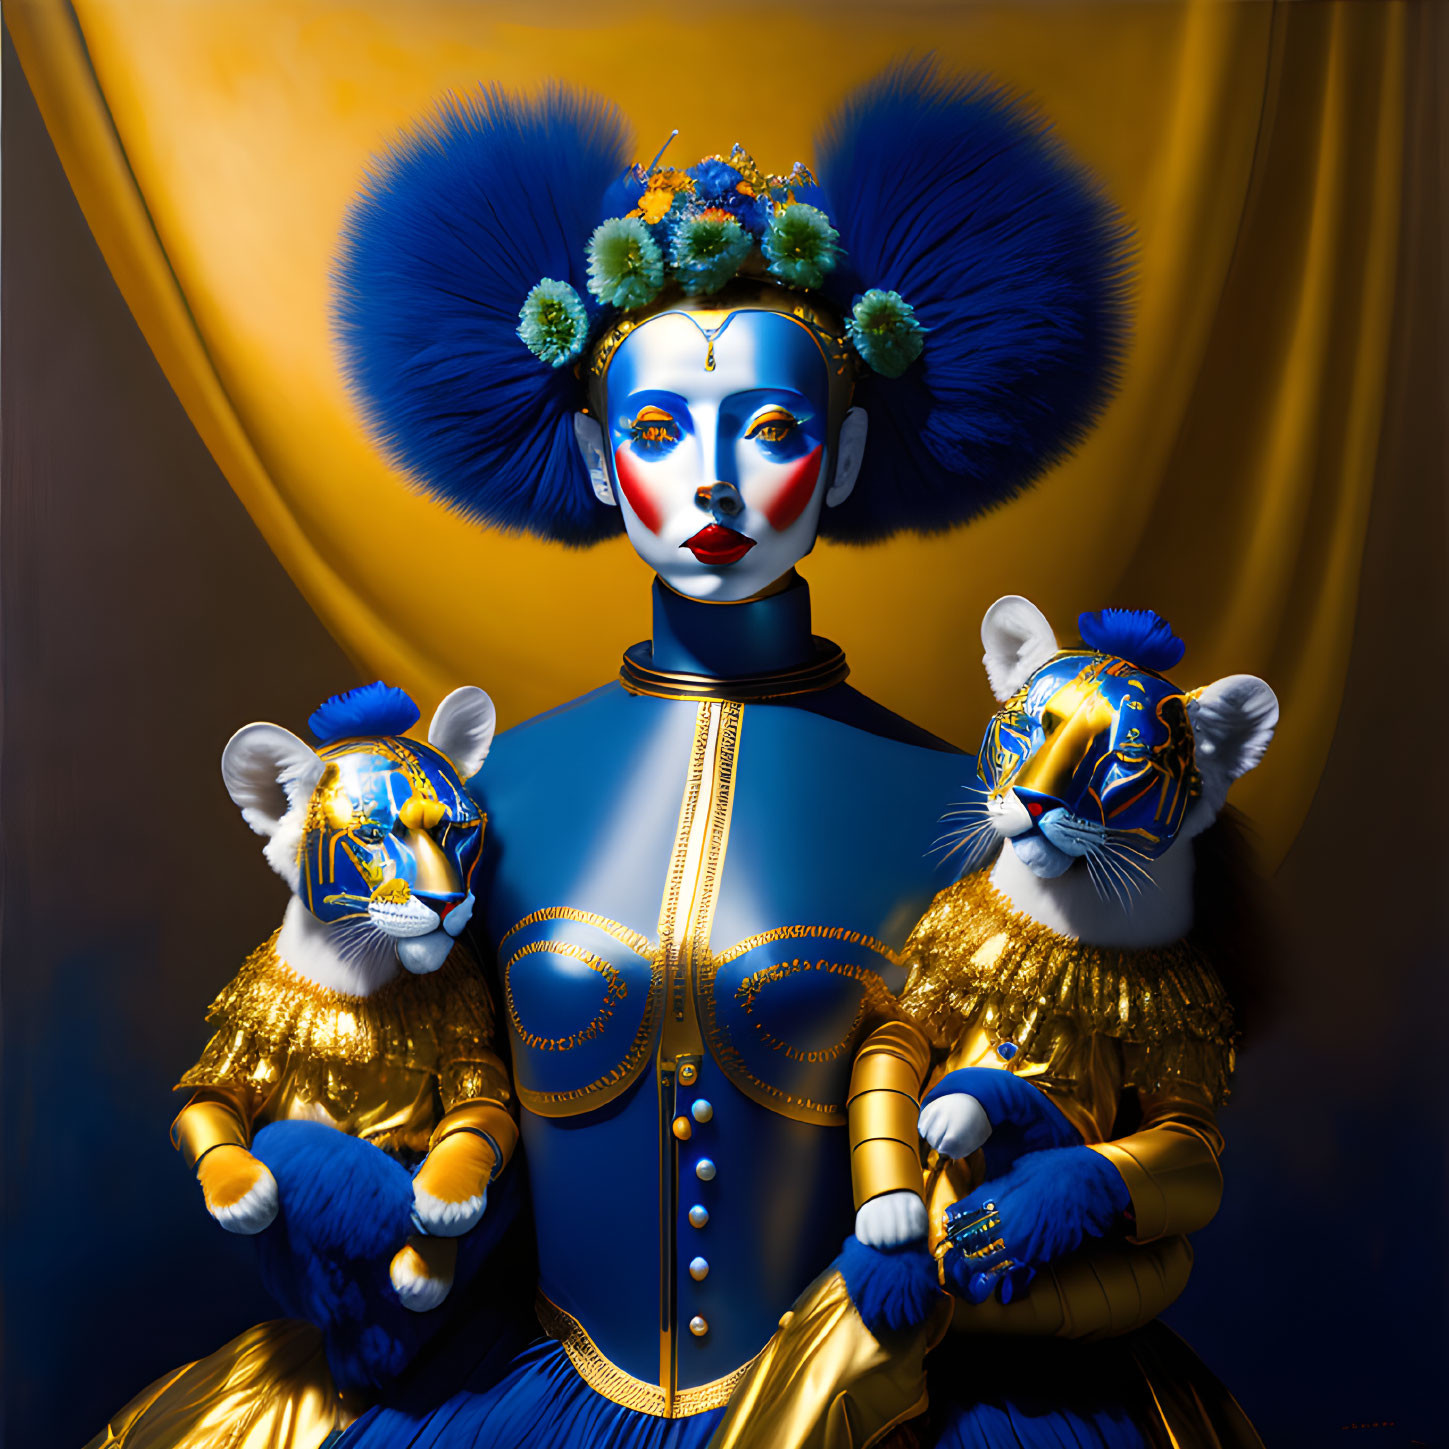 Blue-skinned figure with elaborate headgear and white tiger figures on golden backdrop